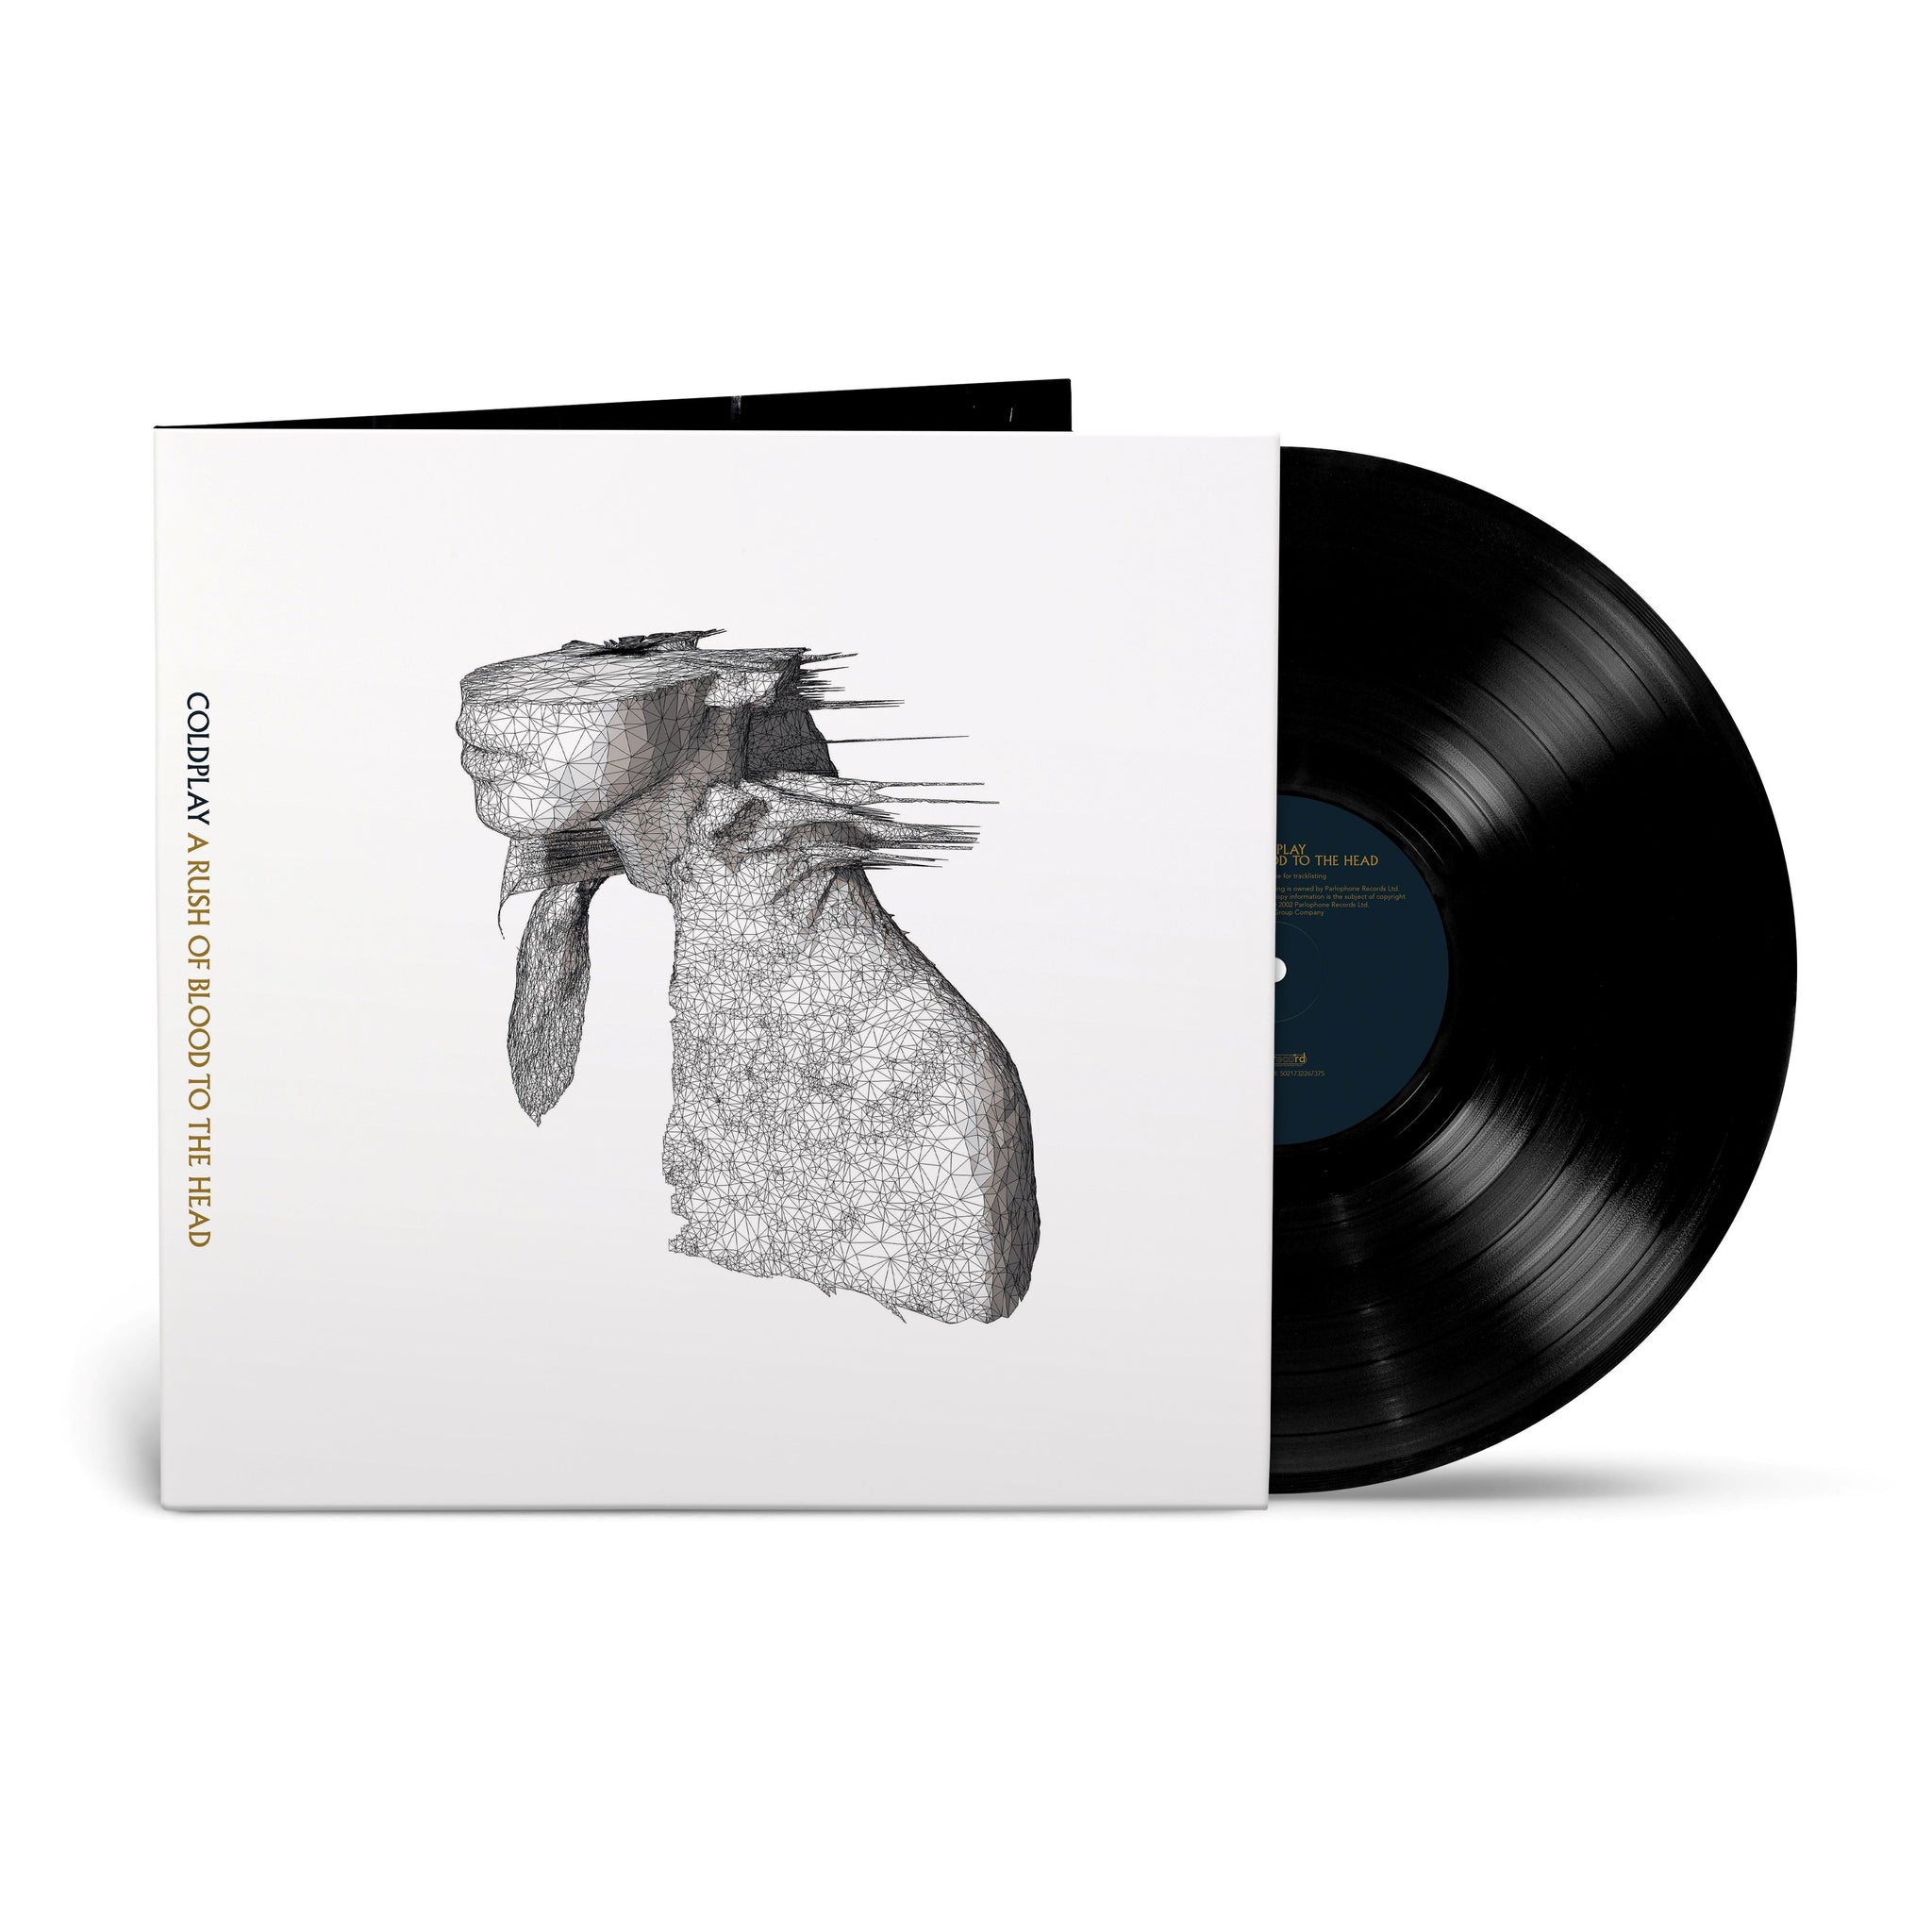 Coldplay "A Rush Of Blood To The Head" Black EcoRecord Vinyl - PRE-ORDER